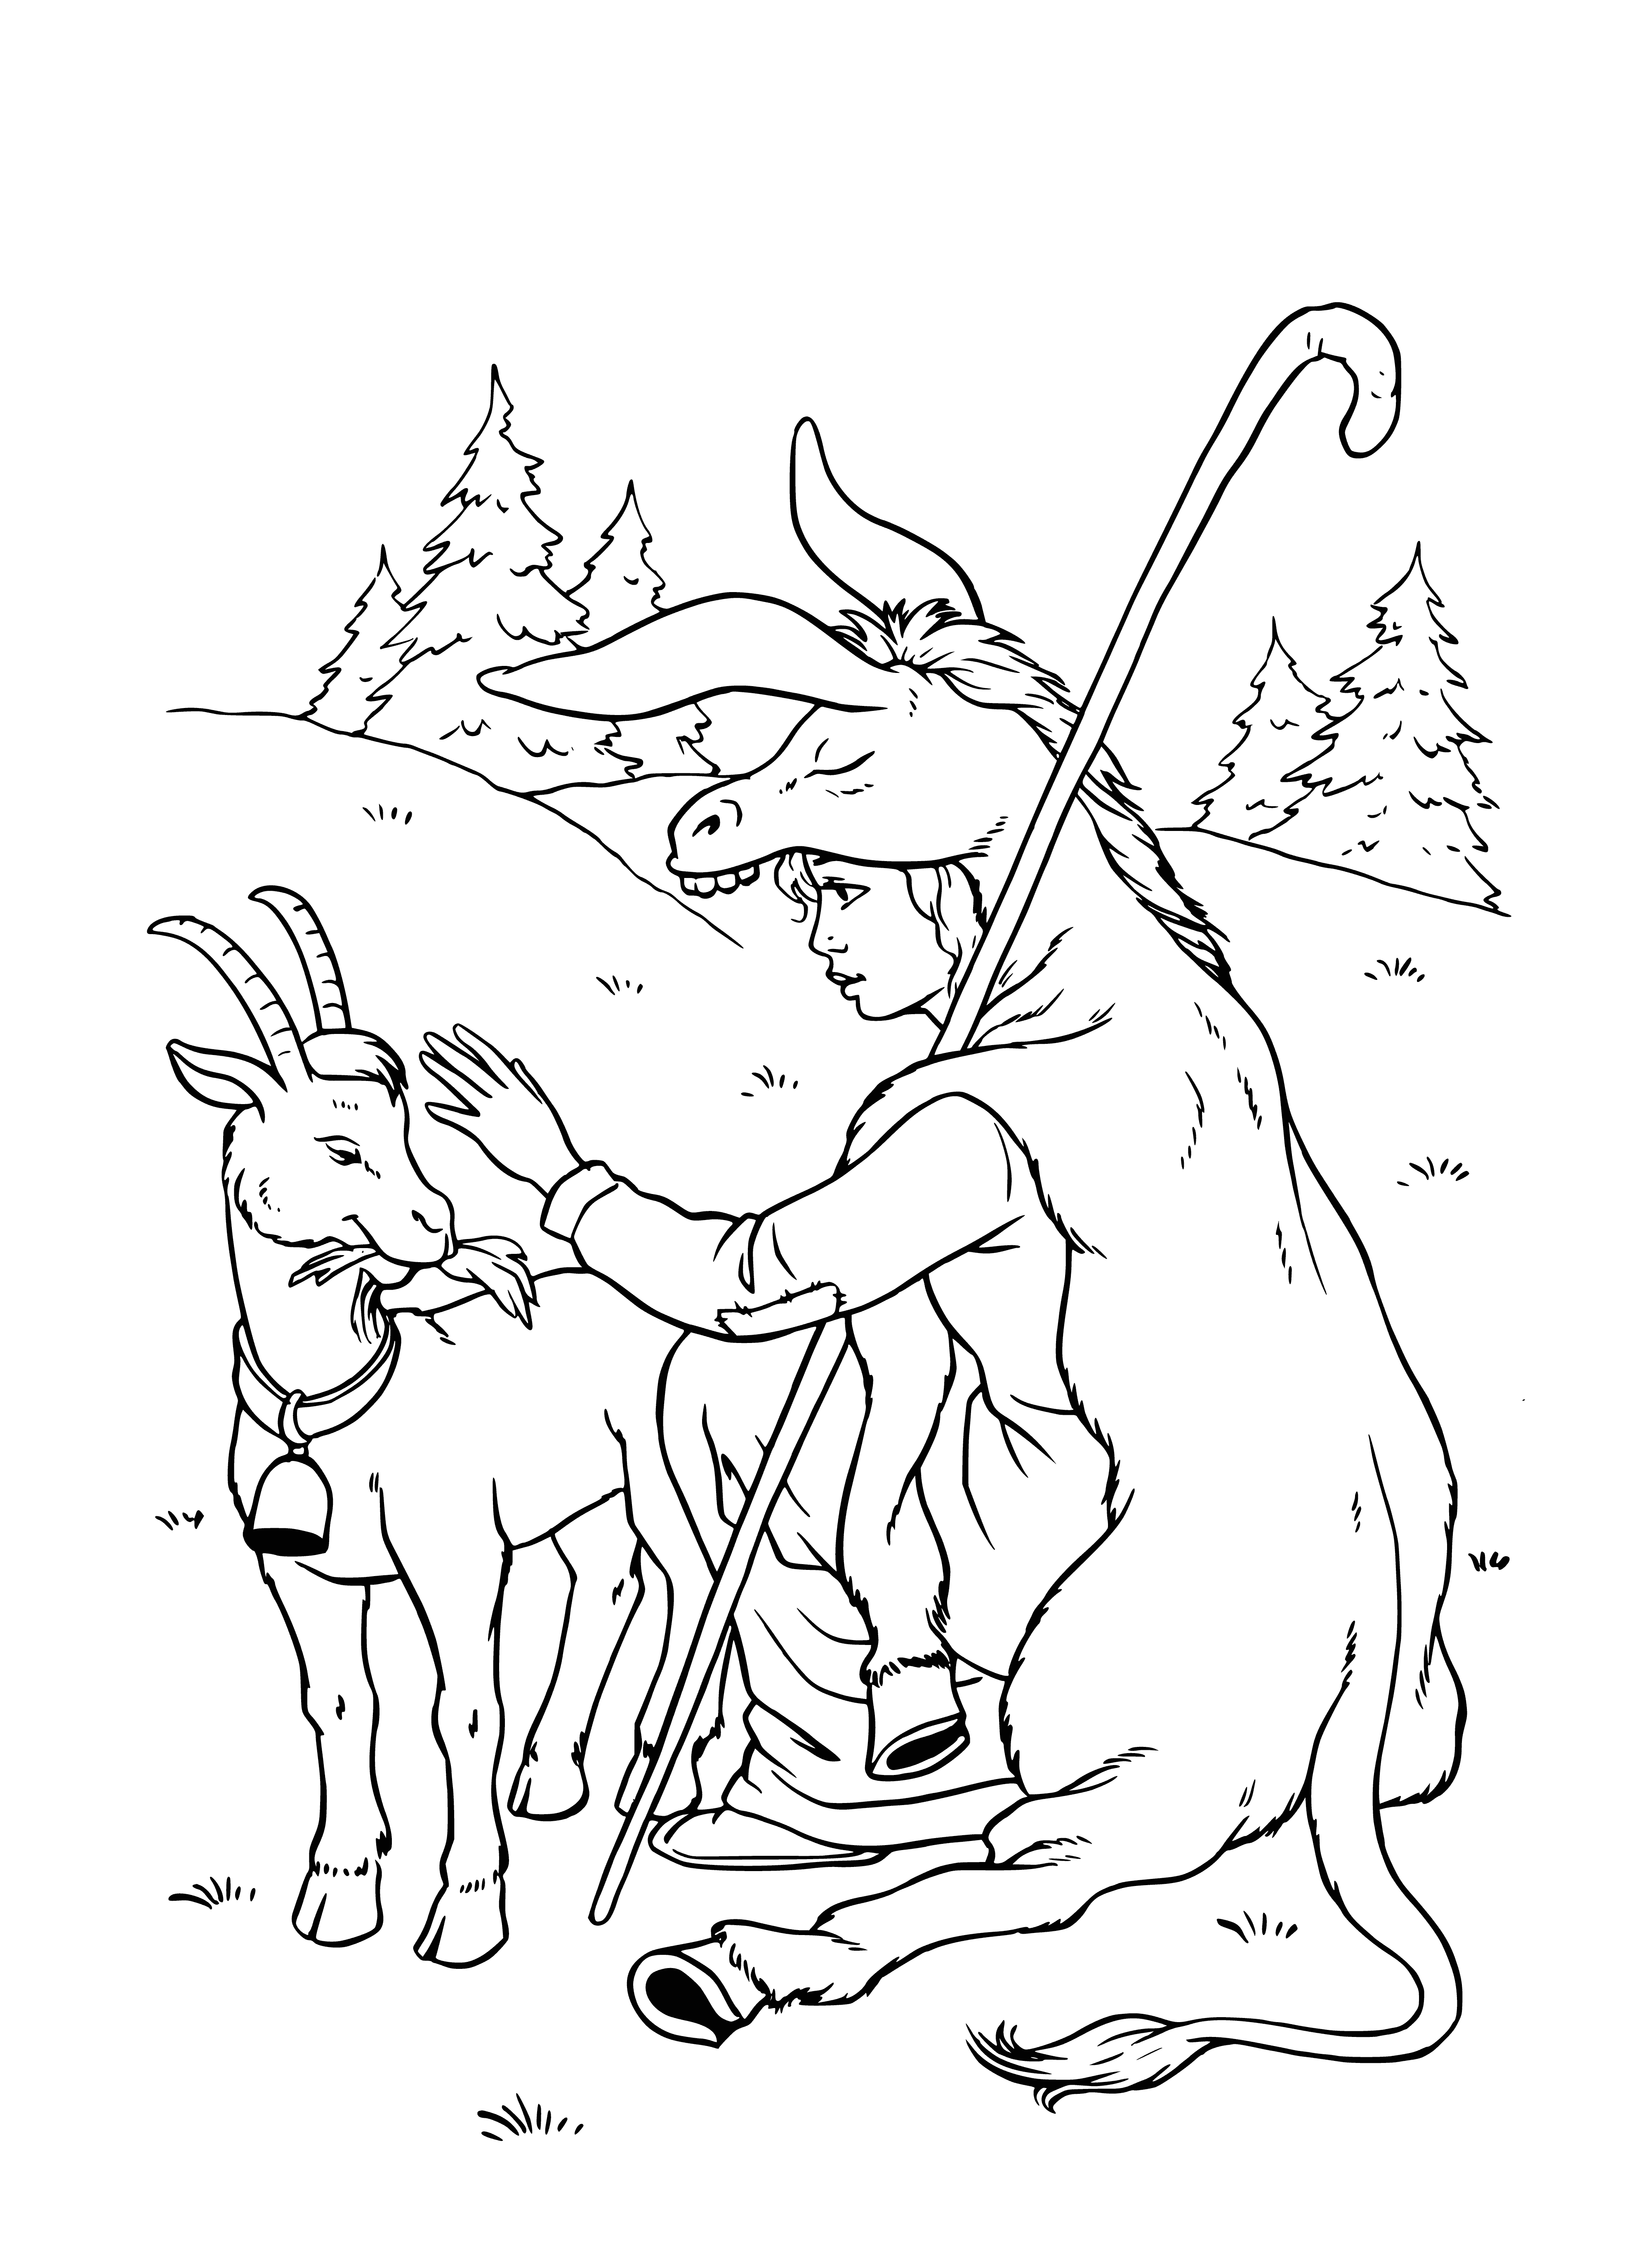 Donkey skin coloring page